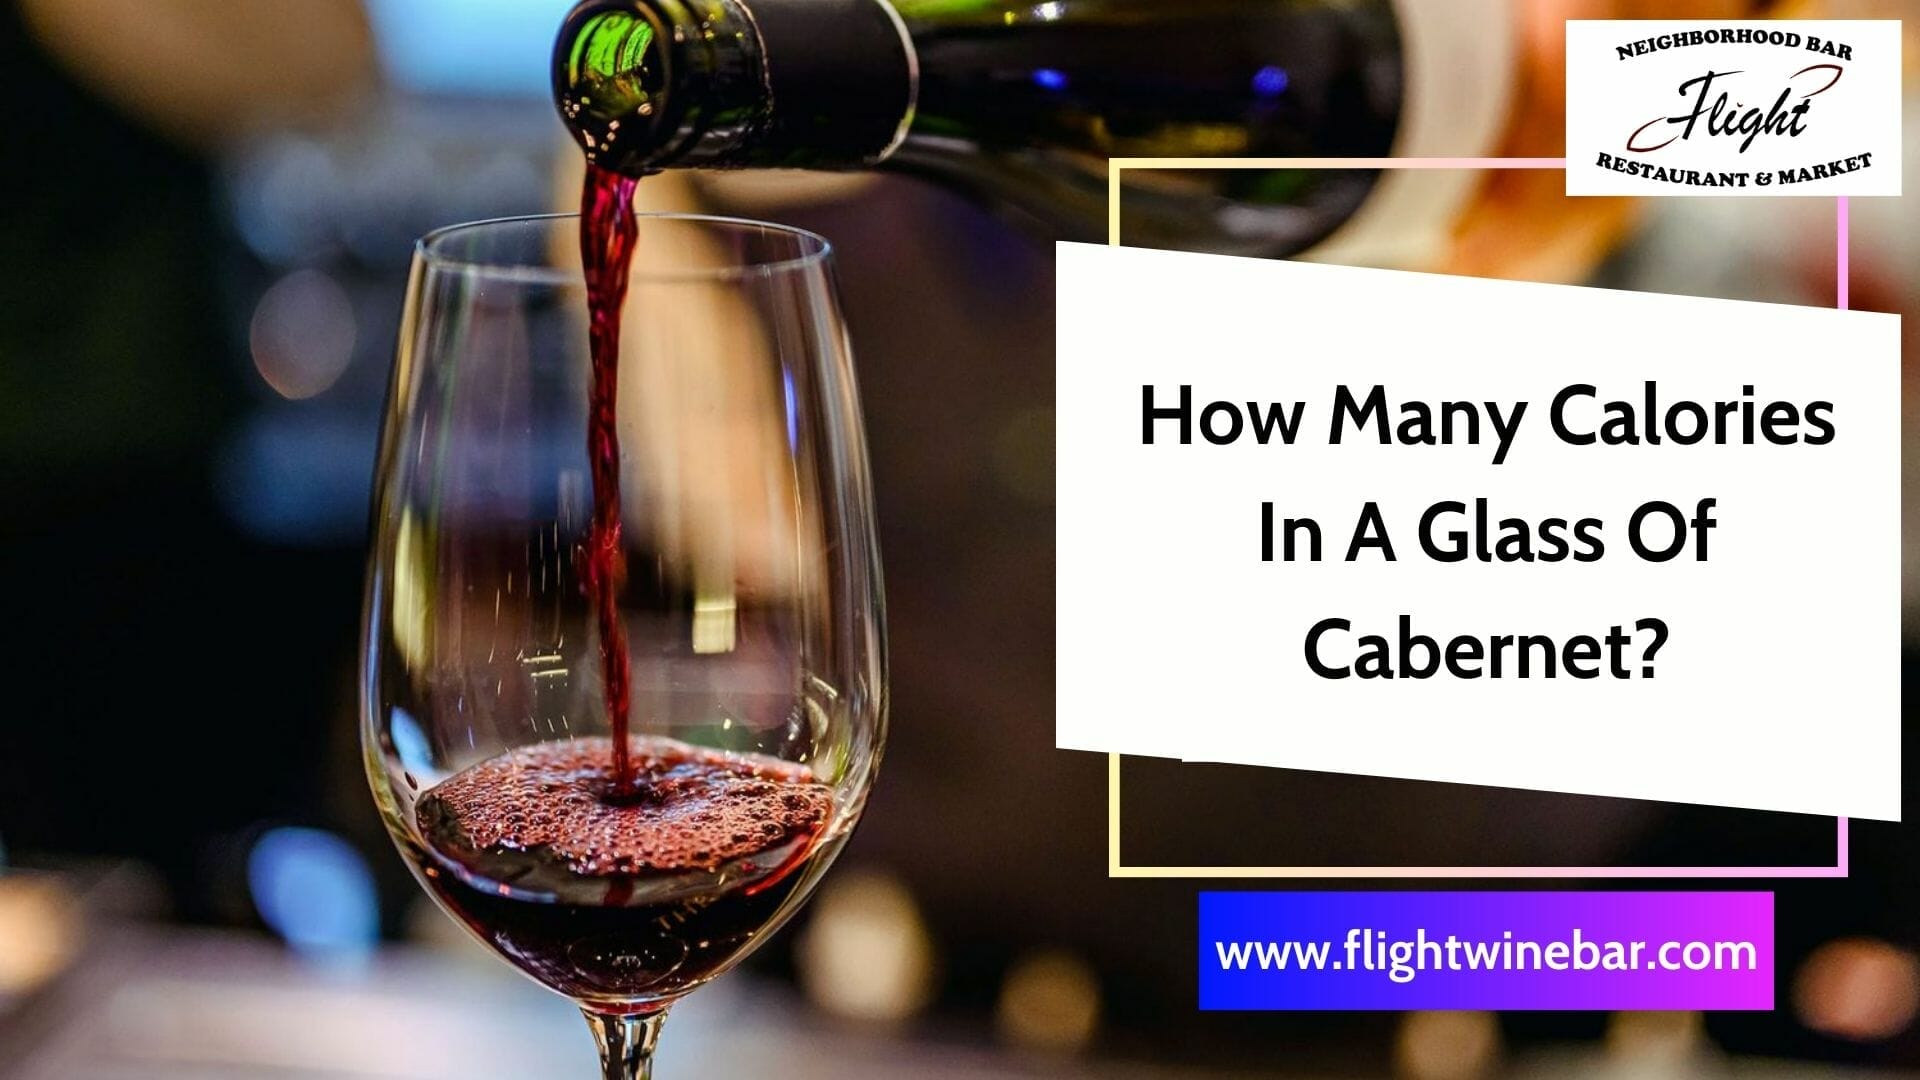 How Many Calories In A Glass Of Cabernet